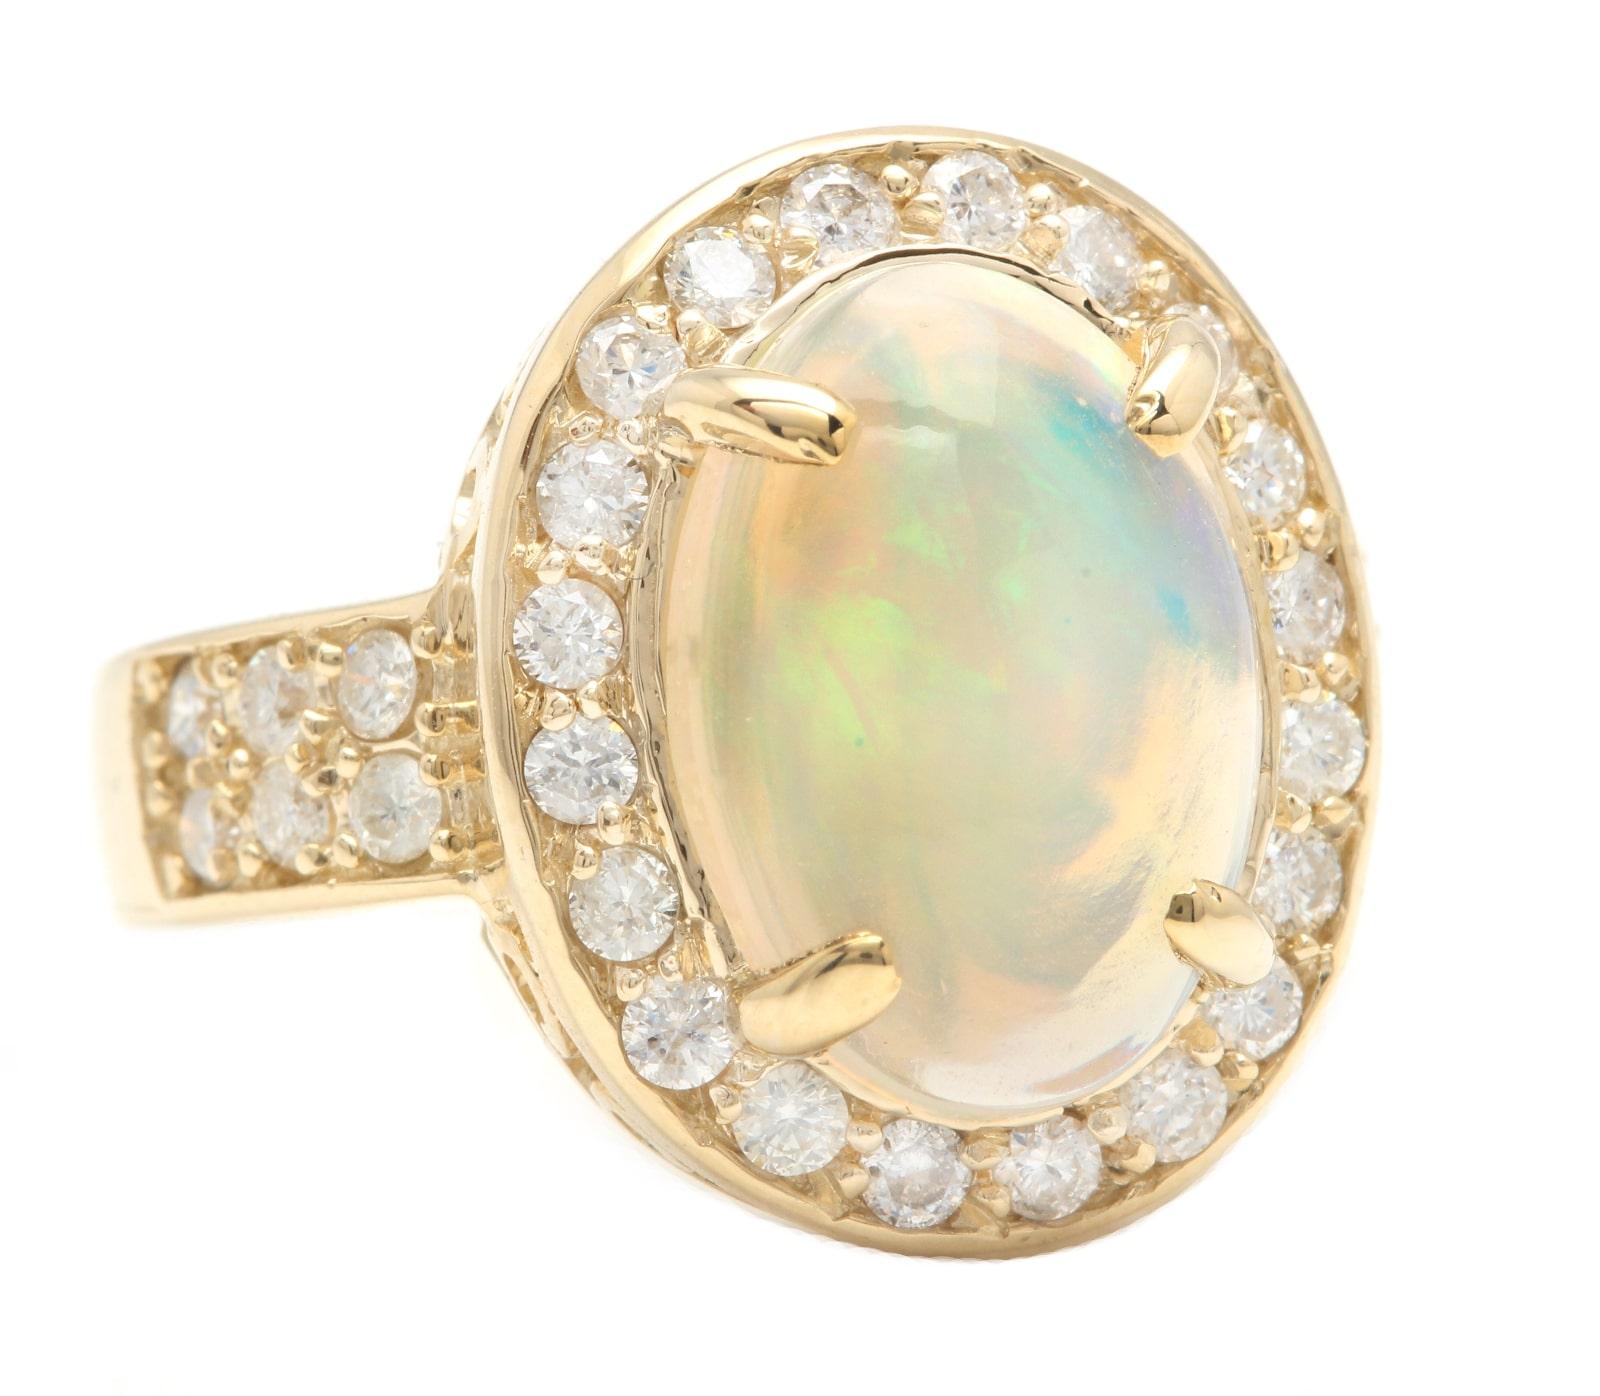 6.00 Carats Natural  Impressive Ethiopian Opal and Diamond 14K Solid Yellow Gold Ring

Suggested Replacement Value: $6,000.00

Total Natural Opal Weight is: Approx. 5.00 Carats 

Opal Measures: Approx. 14.00x 10.00mm

Total Natural Round Diamonds